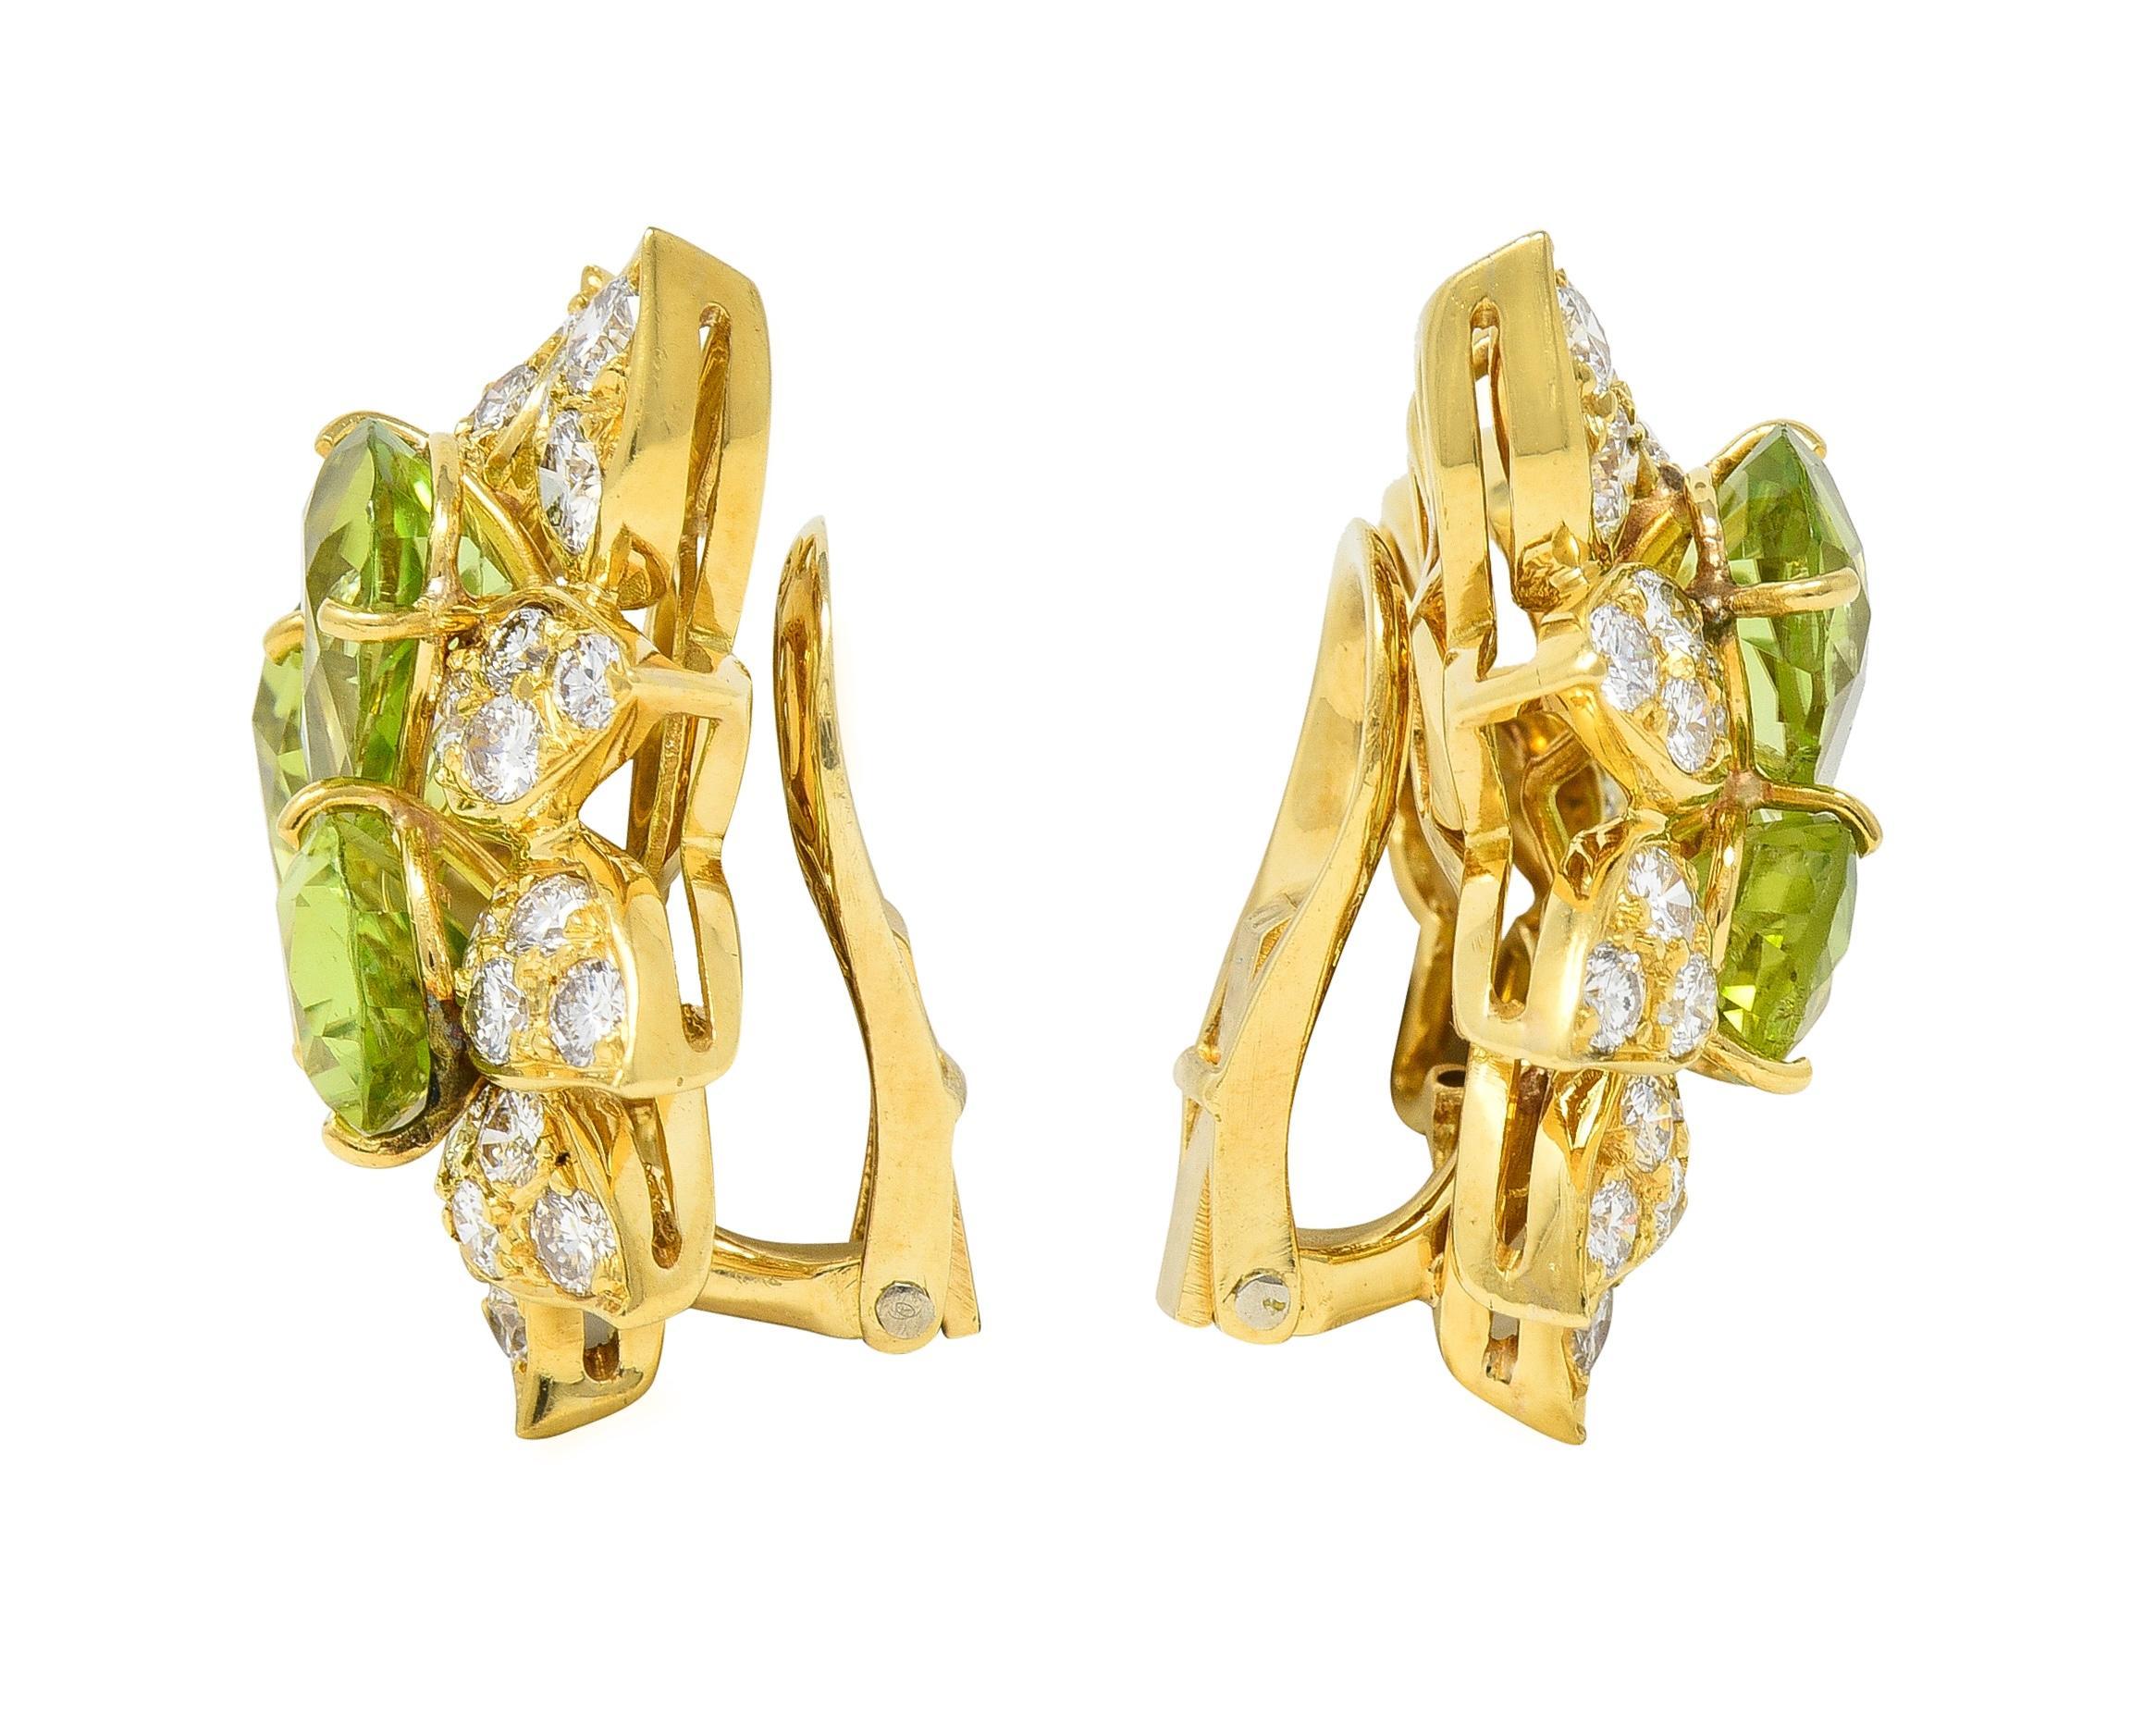 Centering clusters of pear-cut peridot weighing approximately 6.90 carats total
Transparent light yellowish green in color - prong set 
With a gold fanning foliate motif surround 
Bead set with round brilliant cut diamonds throughout 
Weighing